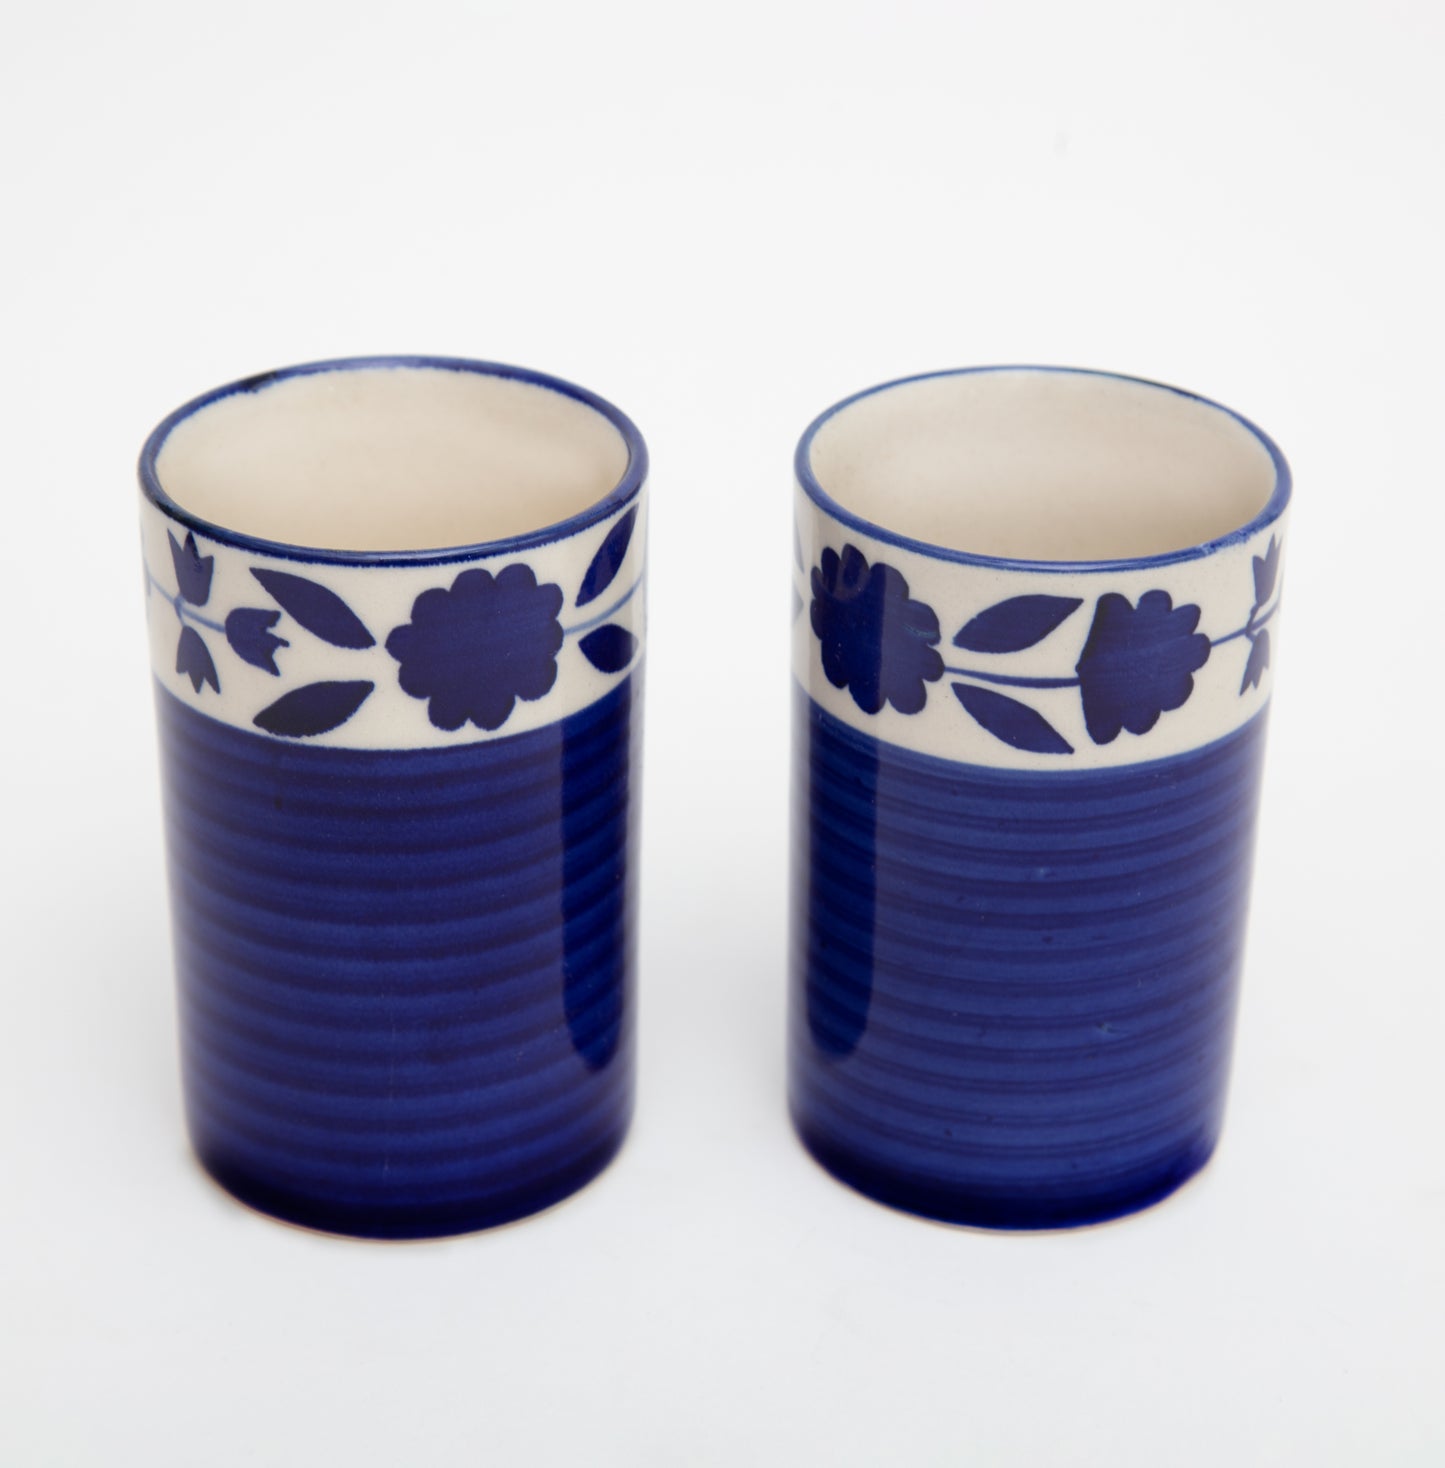 200ml Handcrafted Mughal Design Water Ceramic Glass (Set of Two)